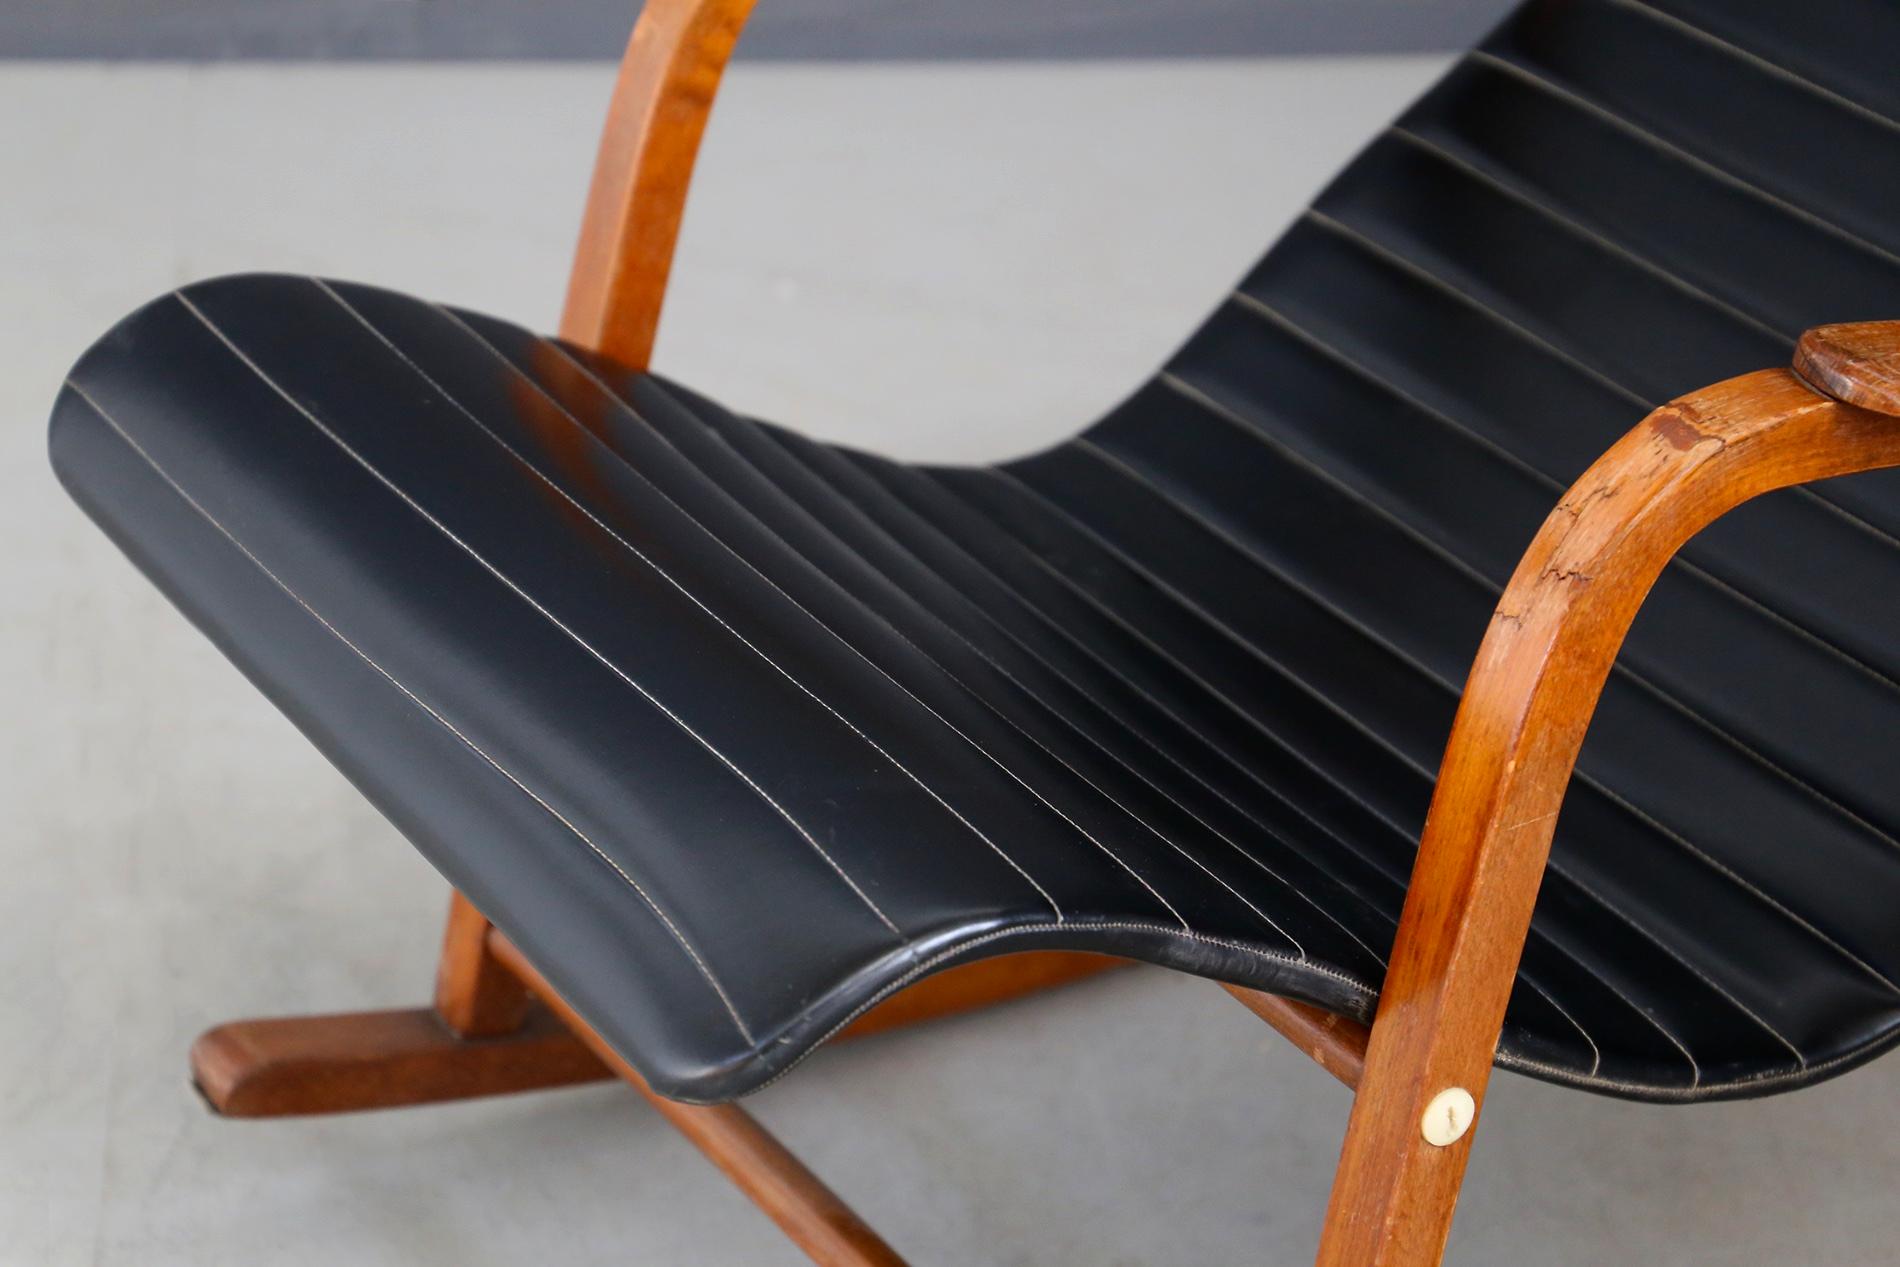 Mid-20th Century Rare Italian Rocking Chair in Black Leather from the 1950s